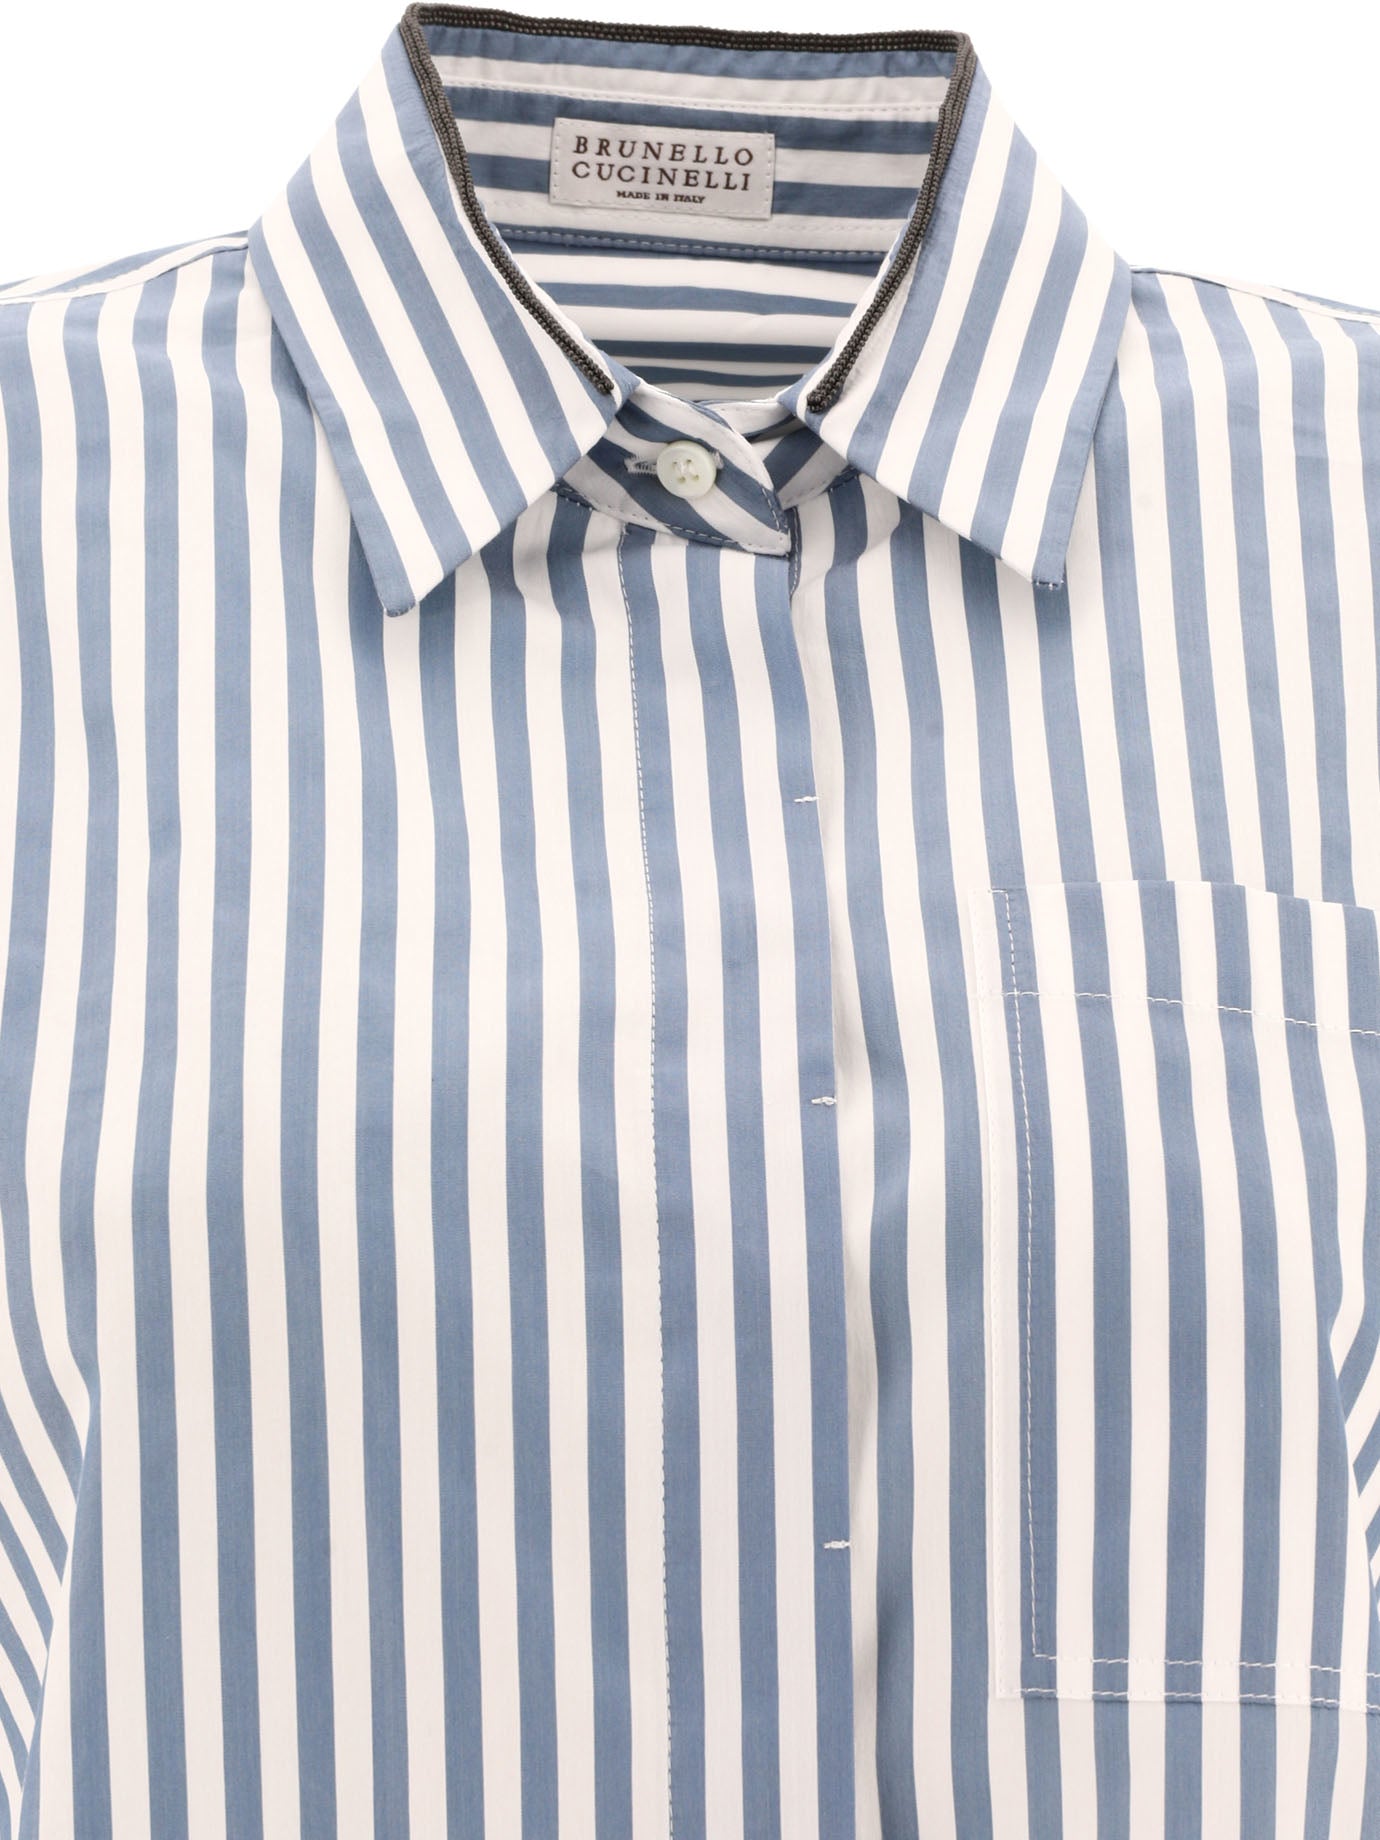 Brunello Cucinelli Striped Shirt With Shiny Collar